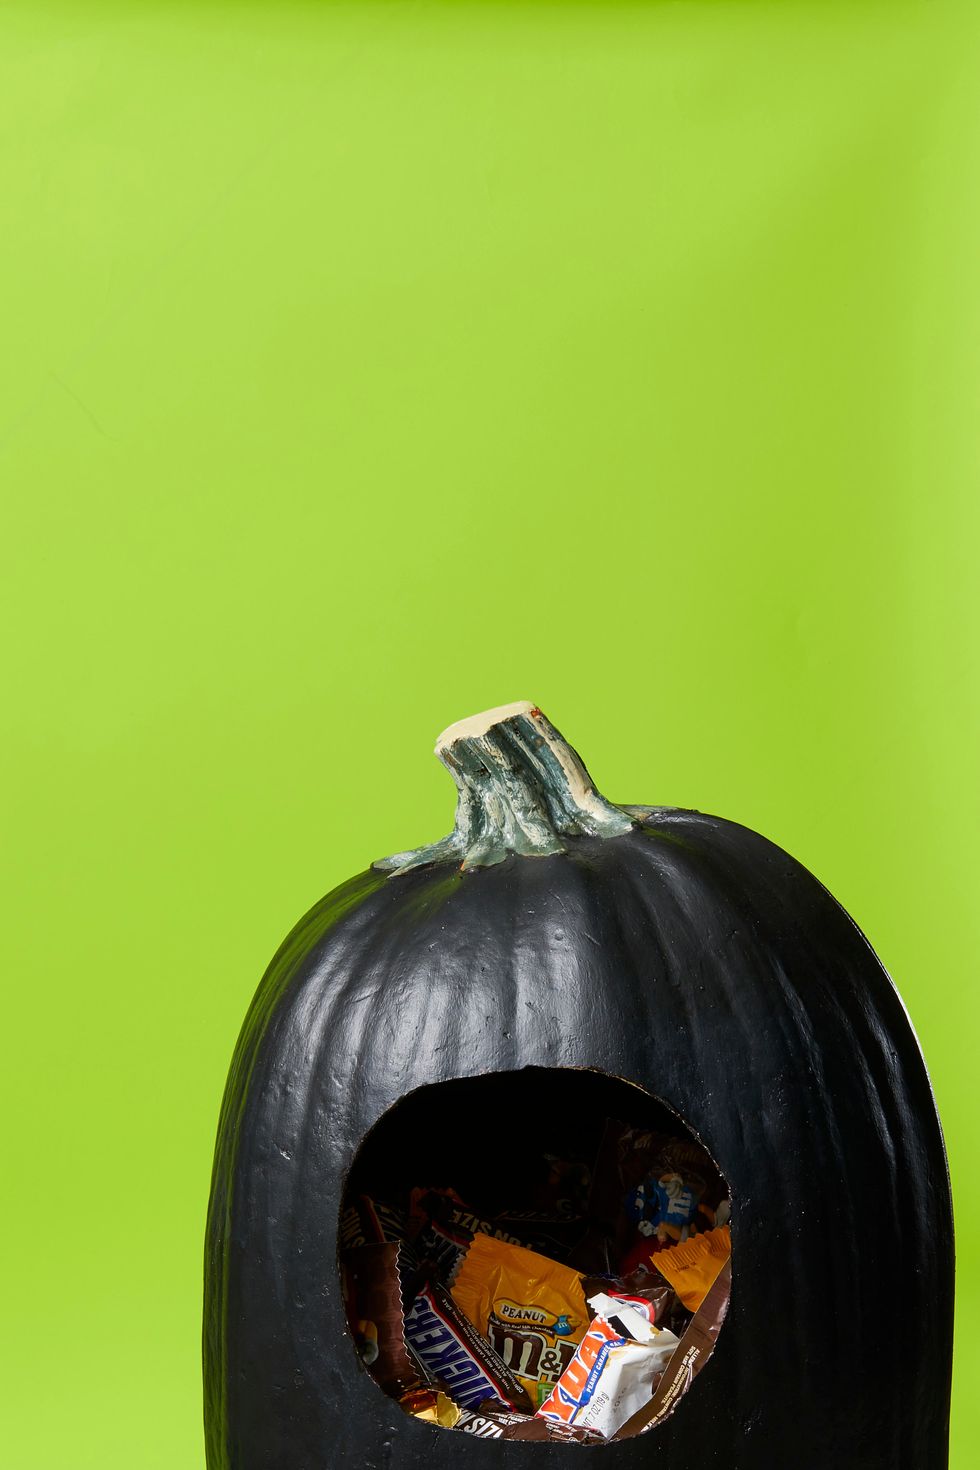 pumpkin carving ideas, black pumpkin with a hole inside filled with candy